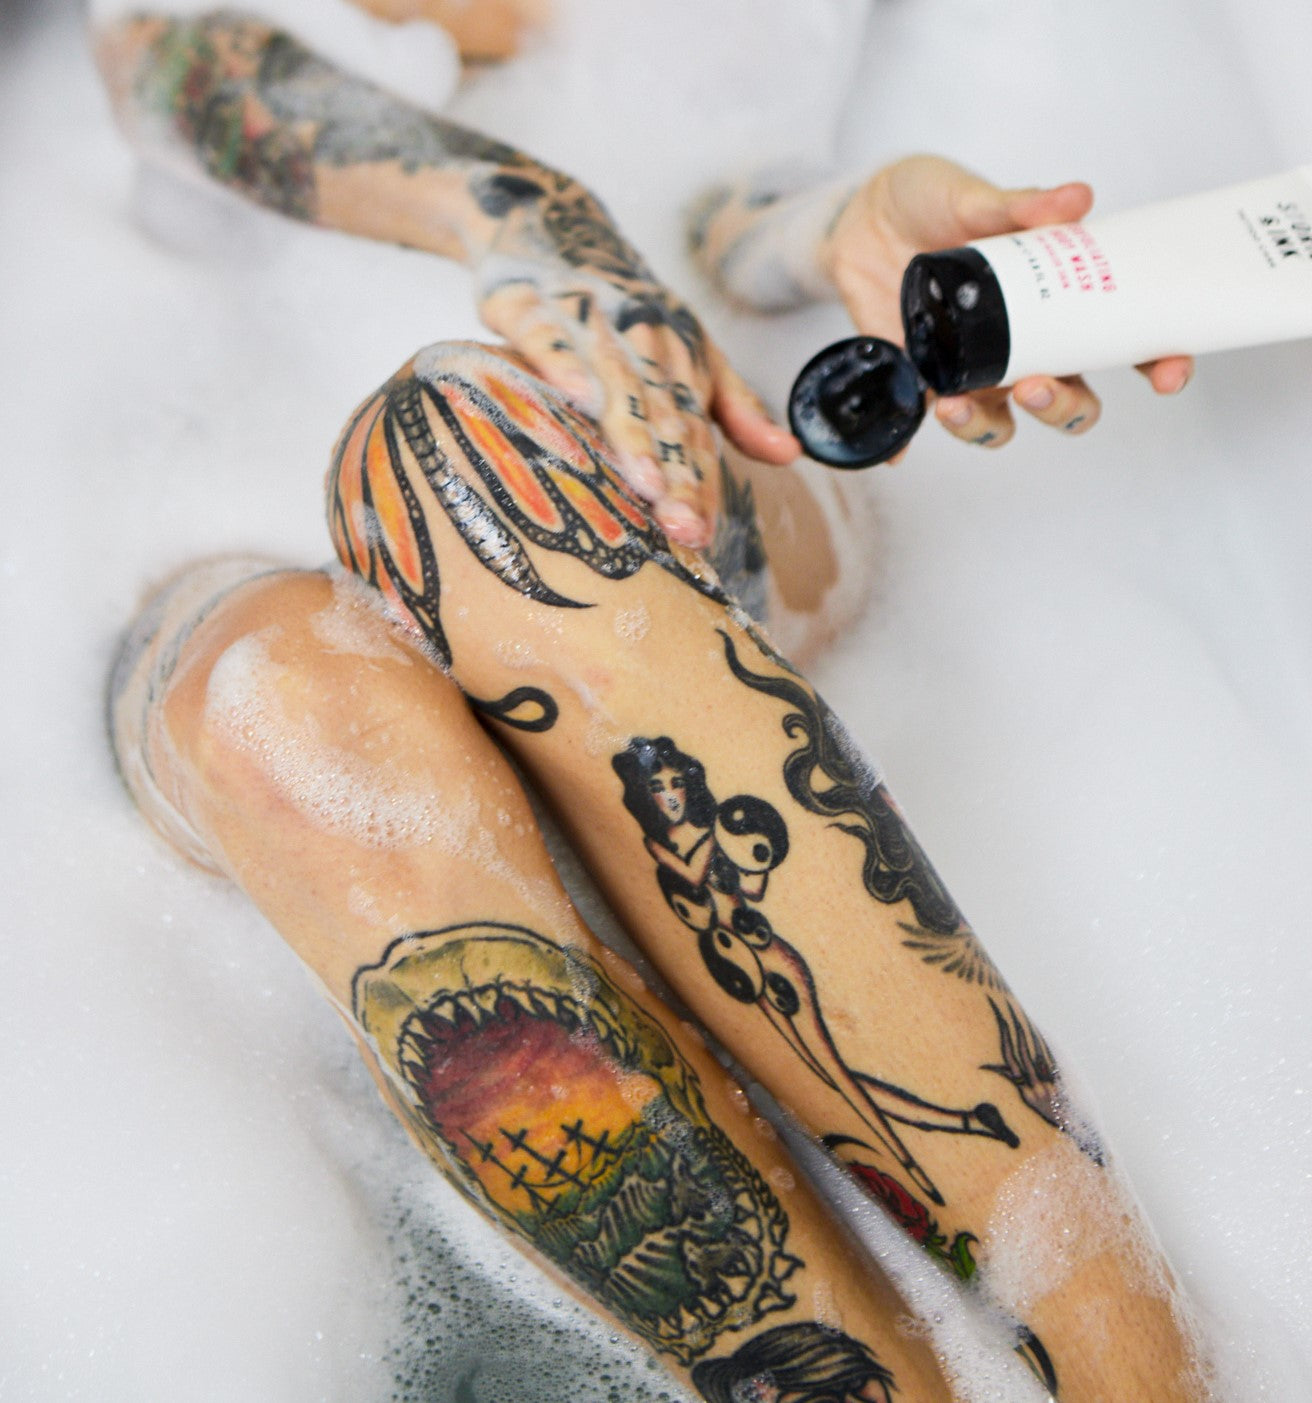 When can I have a bath after getting a new tattoo?